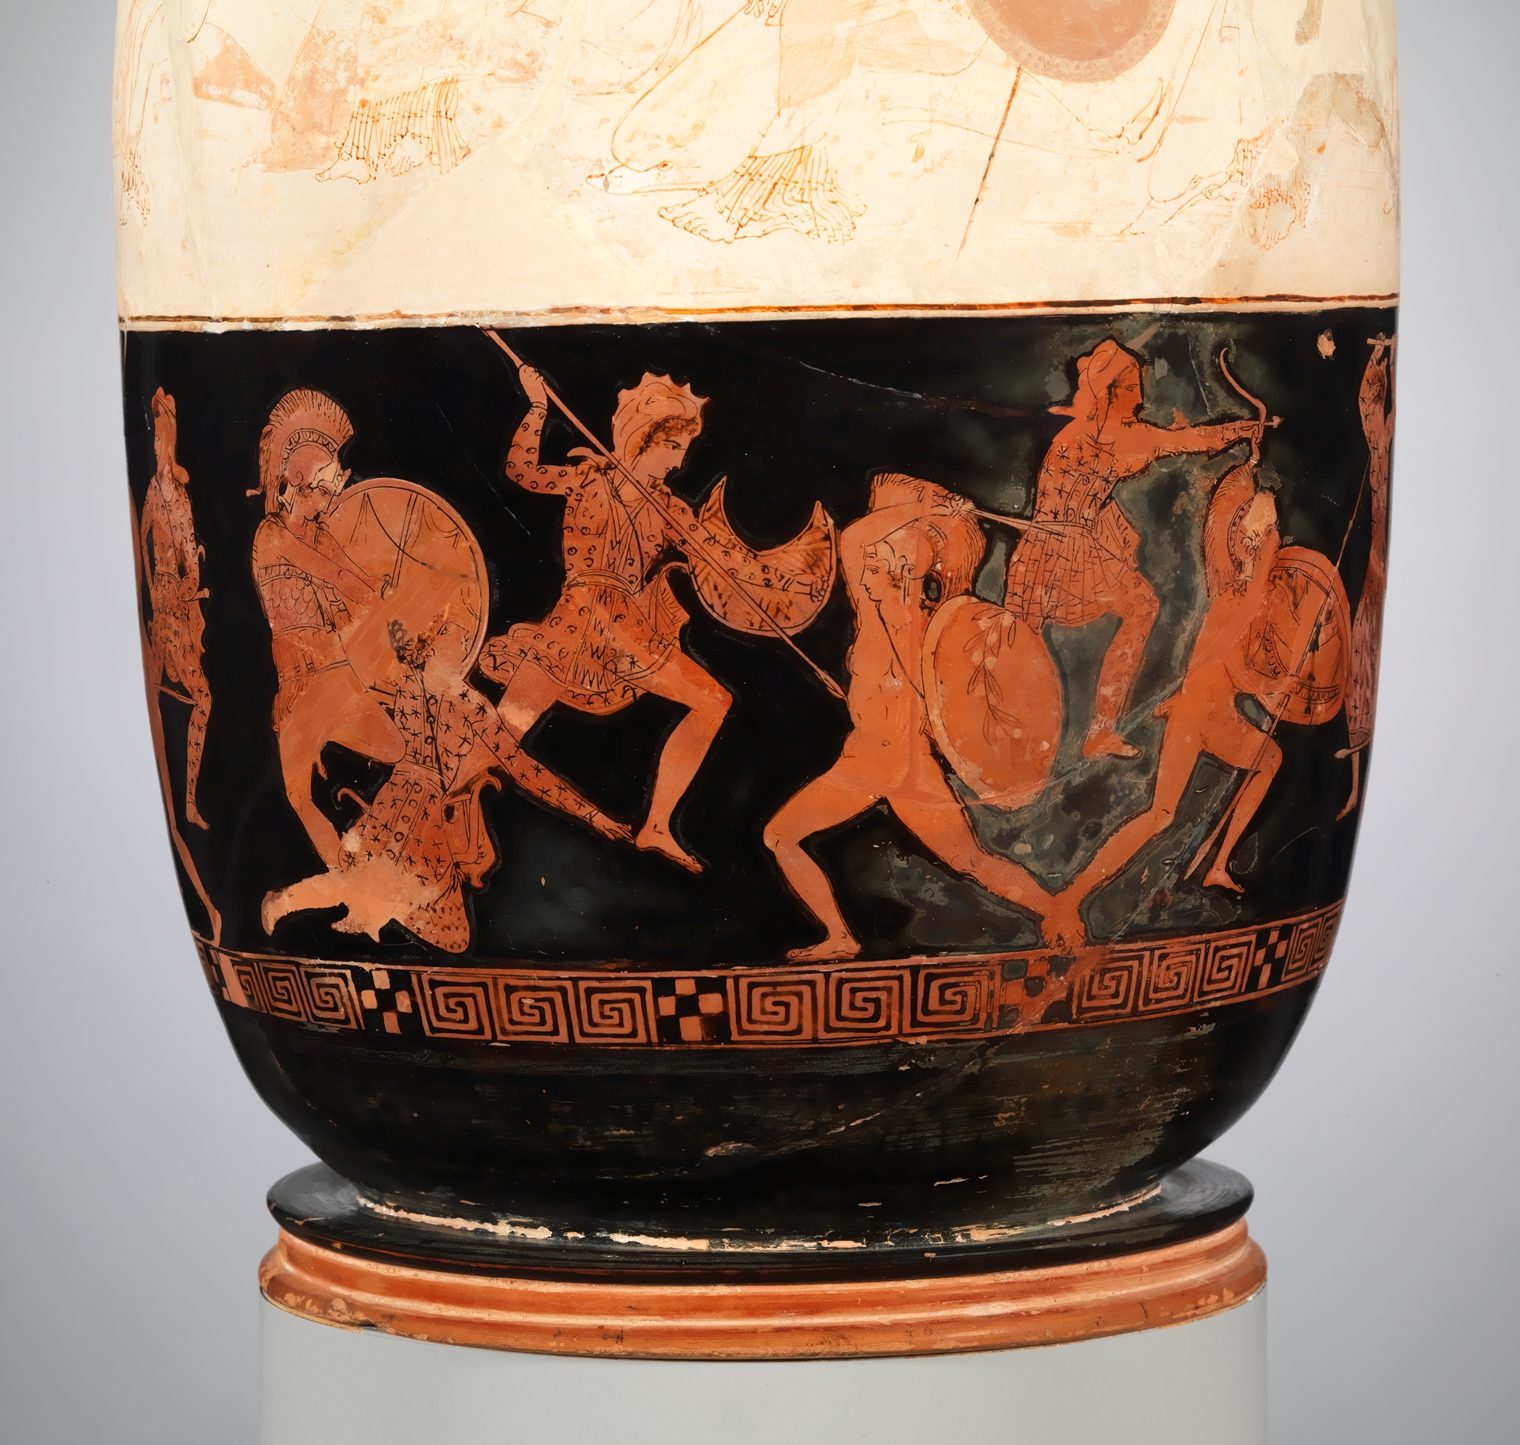 Three Greeks, with helms, swords, and round shields, fight four amazons. The amazons have spears, bows, and crescent-shaped shields. The Amazons wear floppy hats, and wear spotted patterned clothes.